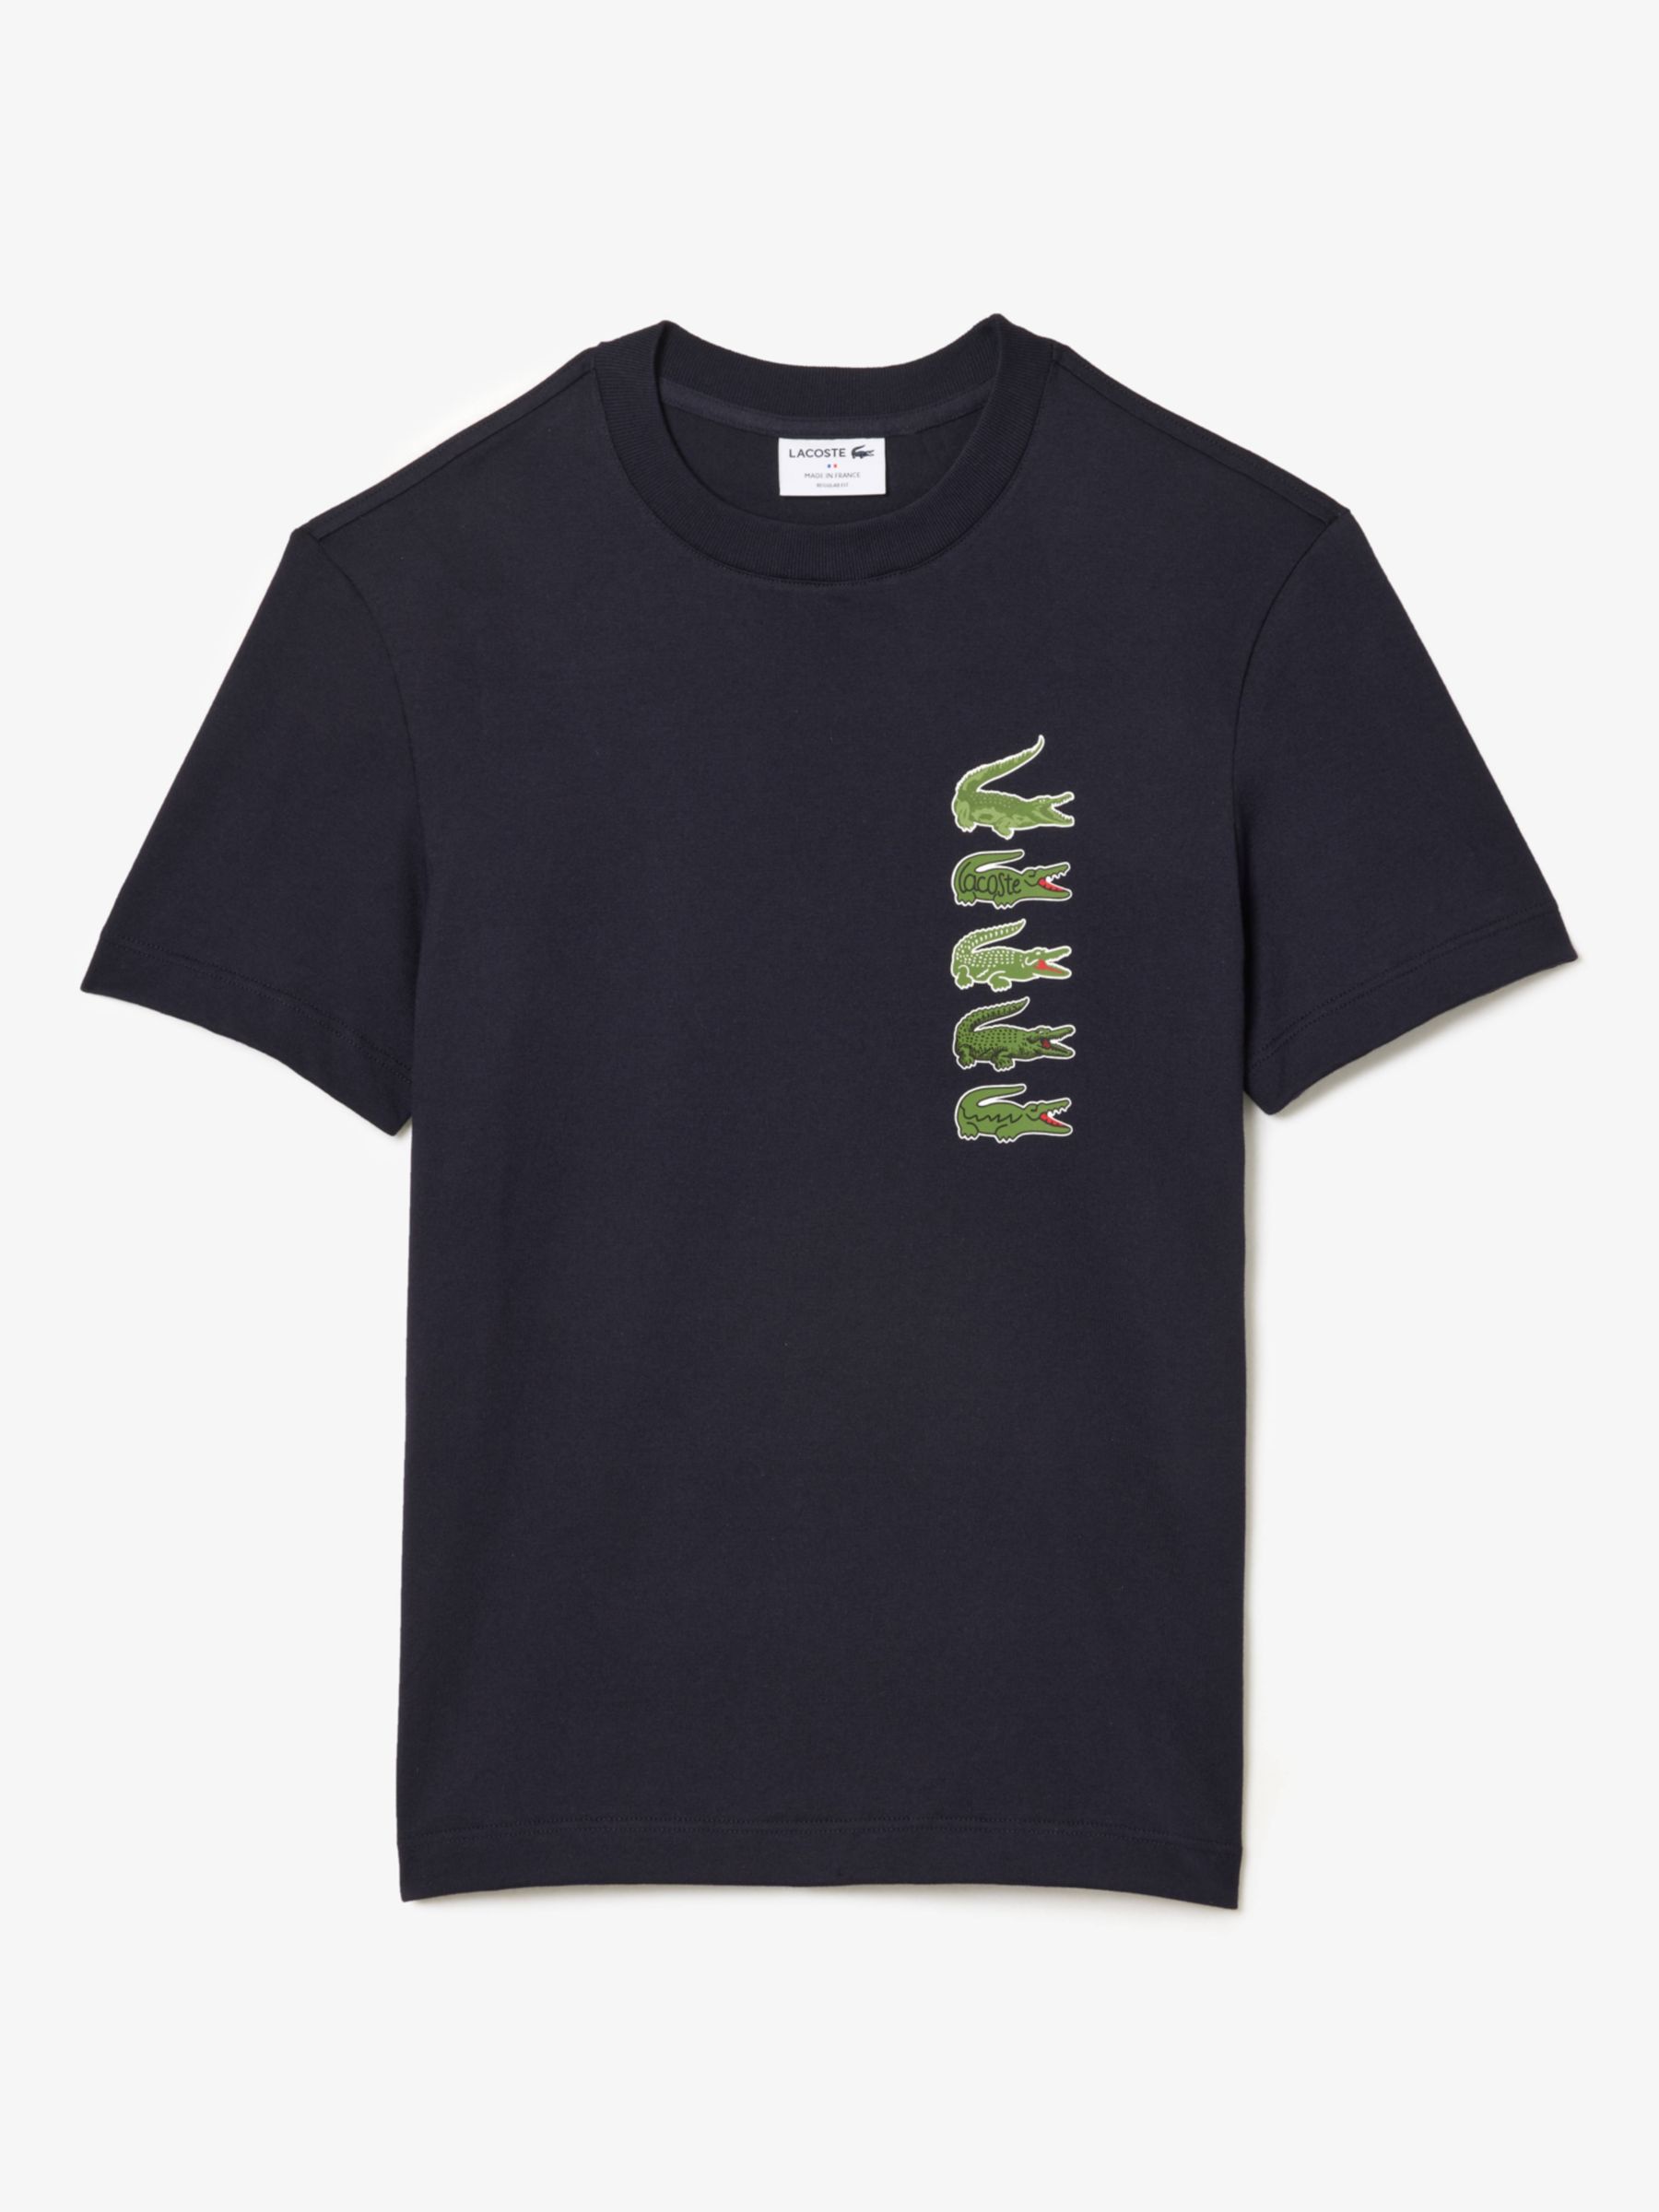 Lacoste Holiday Croc Logo Cotton Crew Neck T-Shirt, Hde Aby